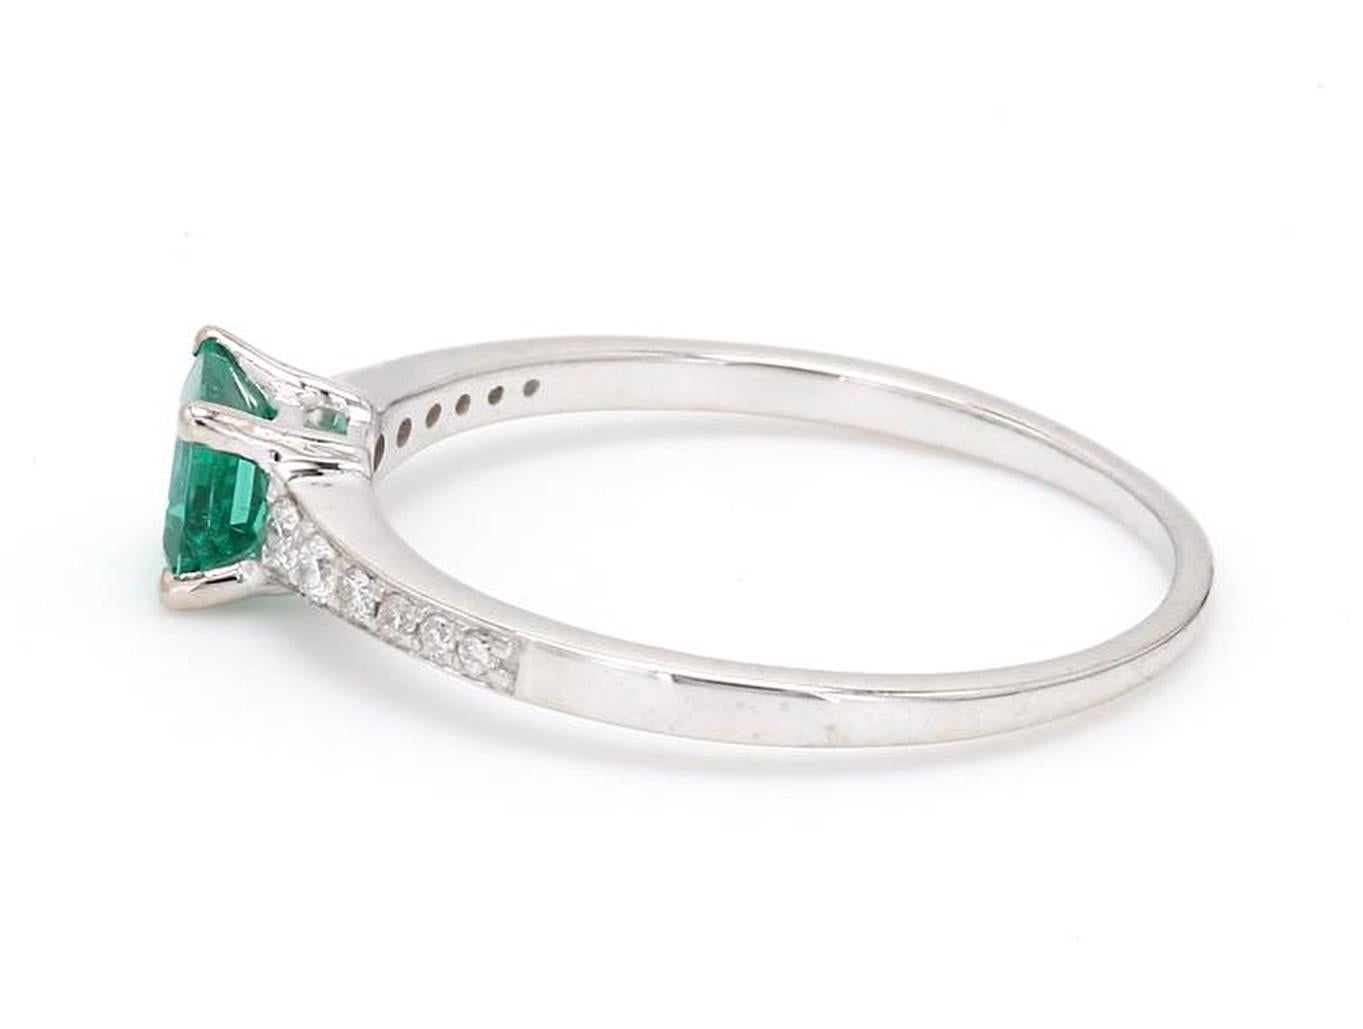 Square Cut Emerald Diamond 18 Karat White Gold Engagement Wedding Ring In New Condition For Sale In Hollywood, FL